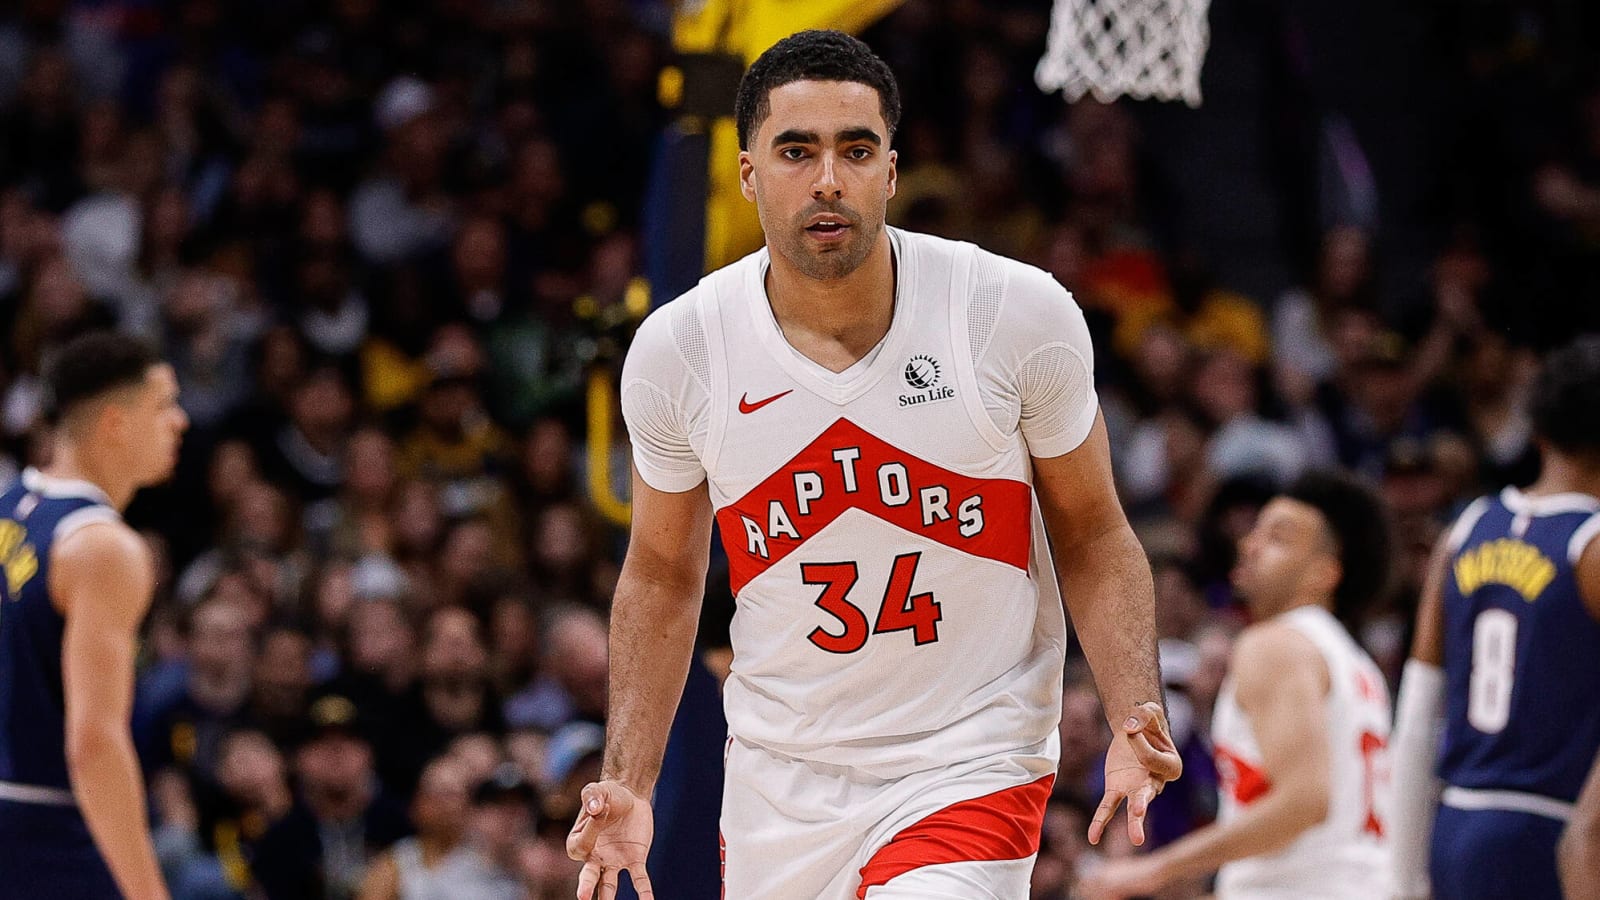 NBA Bans Raptors’ Jontay Porter For Life After He Bet On Own Team To Lose